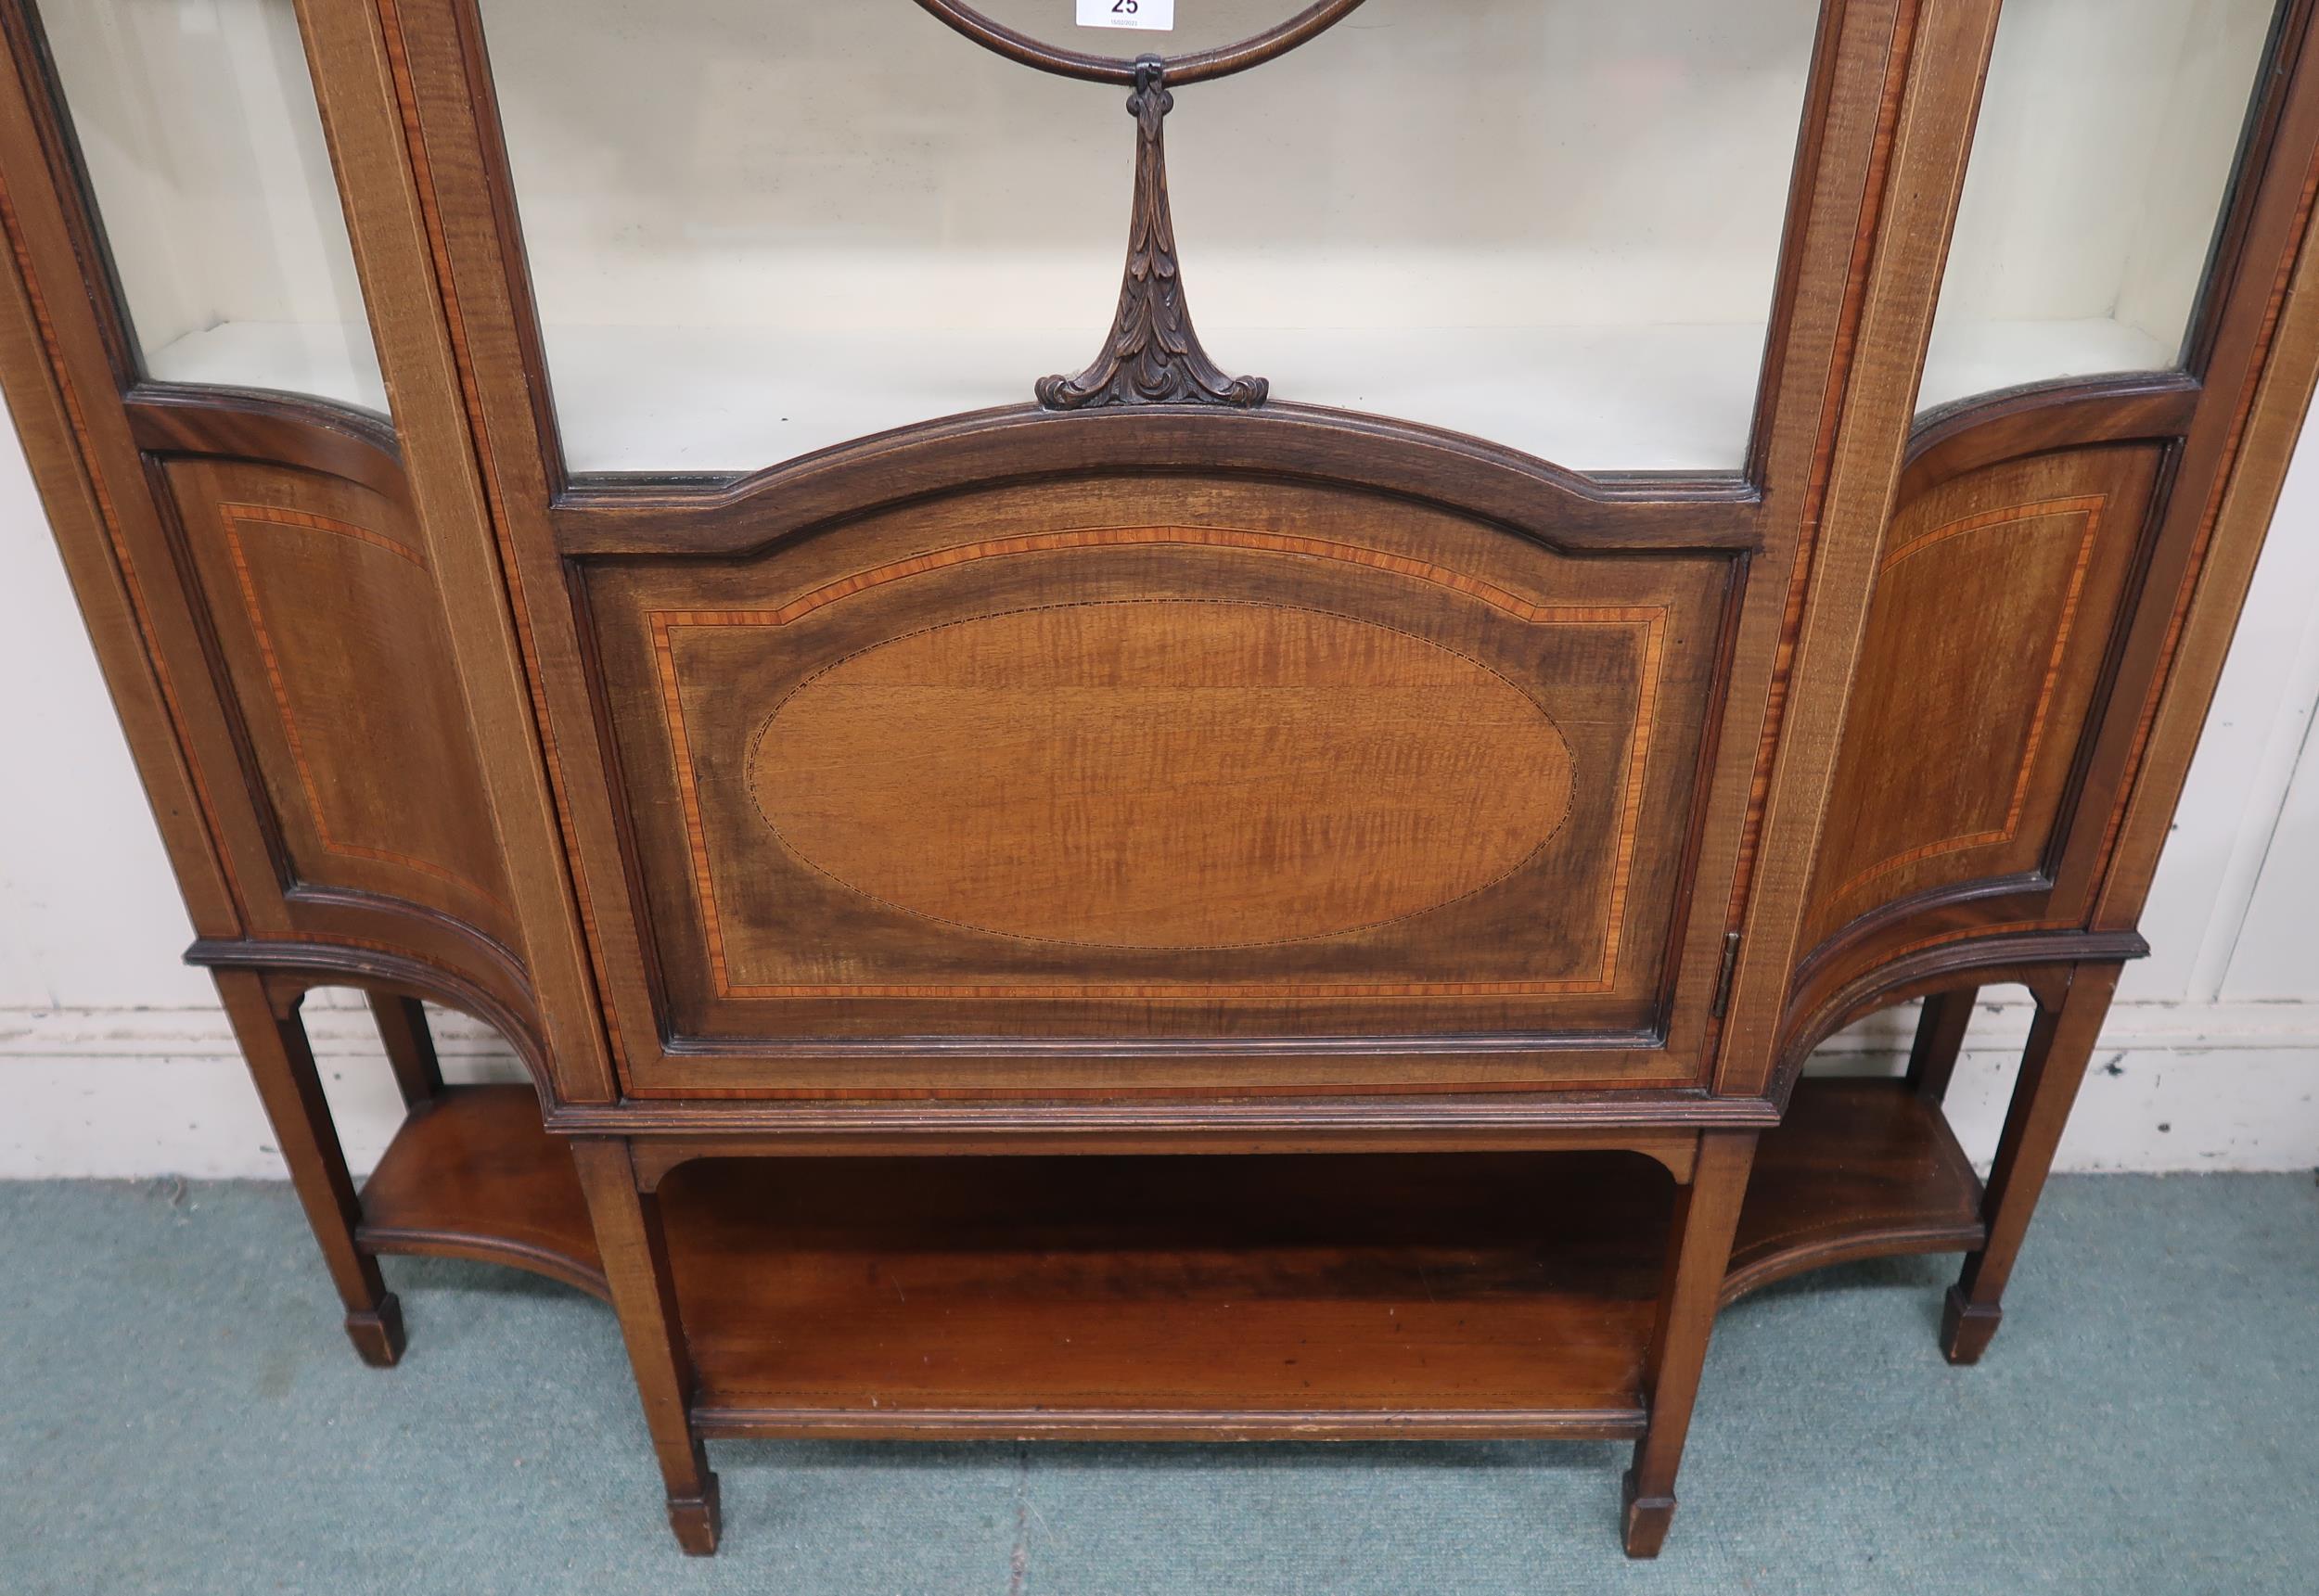 An Edwardian mahogany and satinwood inlaid display cabinet with moulded cornice over single glazed - Image 2 of 6